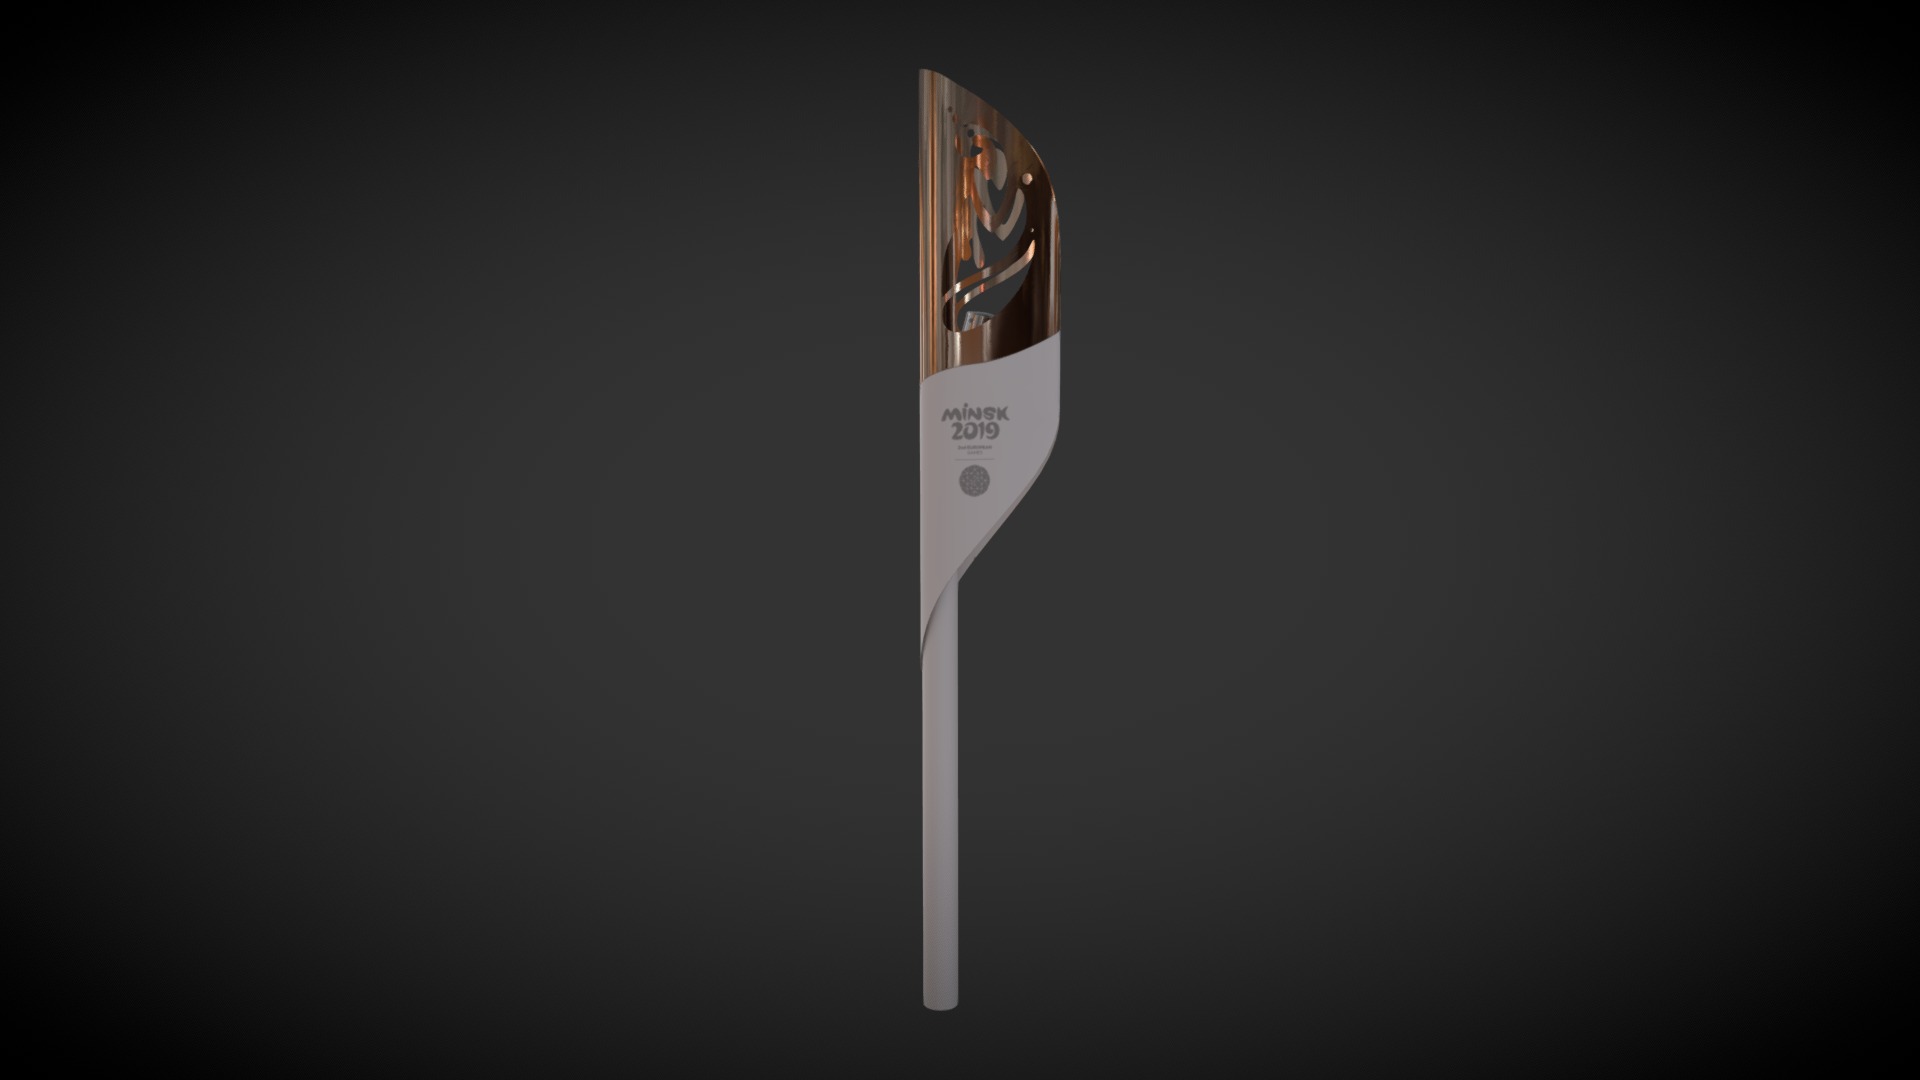 3D model Minsk 2019 Torch - This is a 3D model of the Minsk 2019 Torch. The 3D model is about logo.